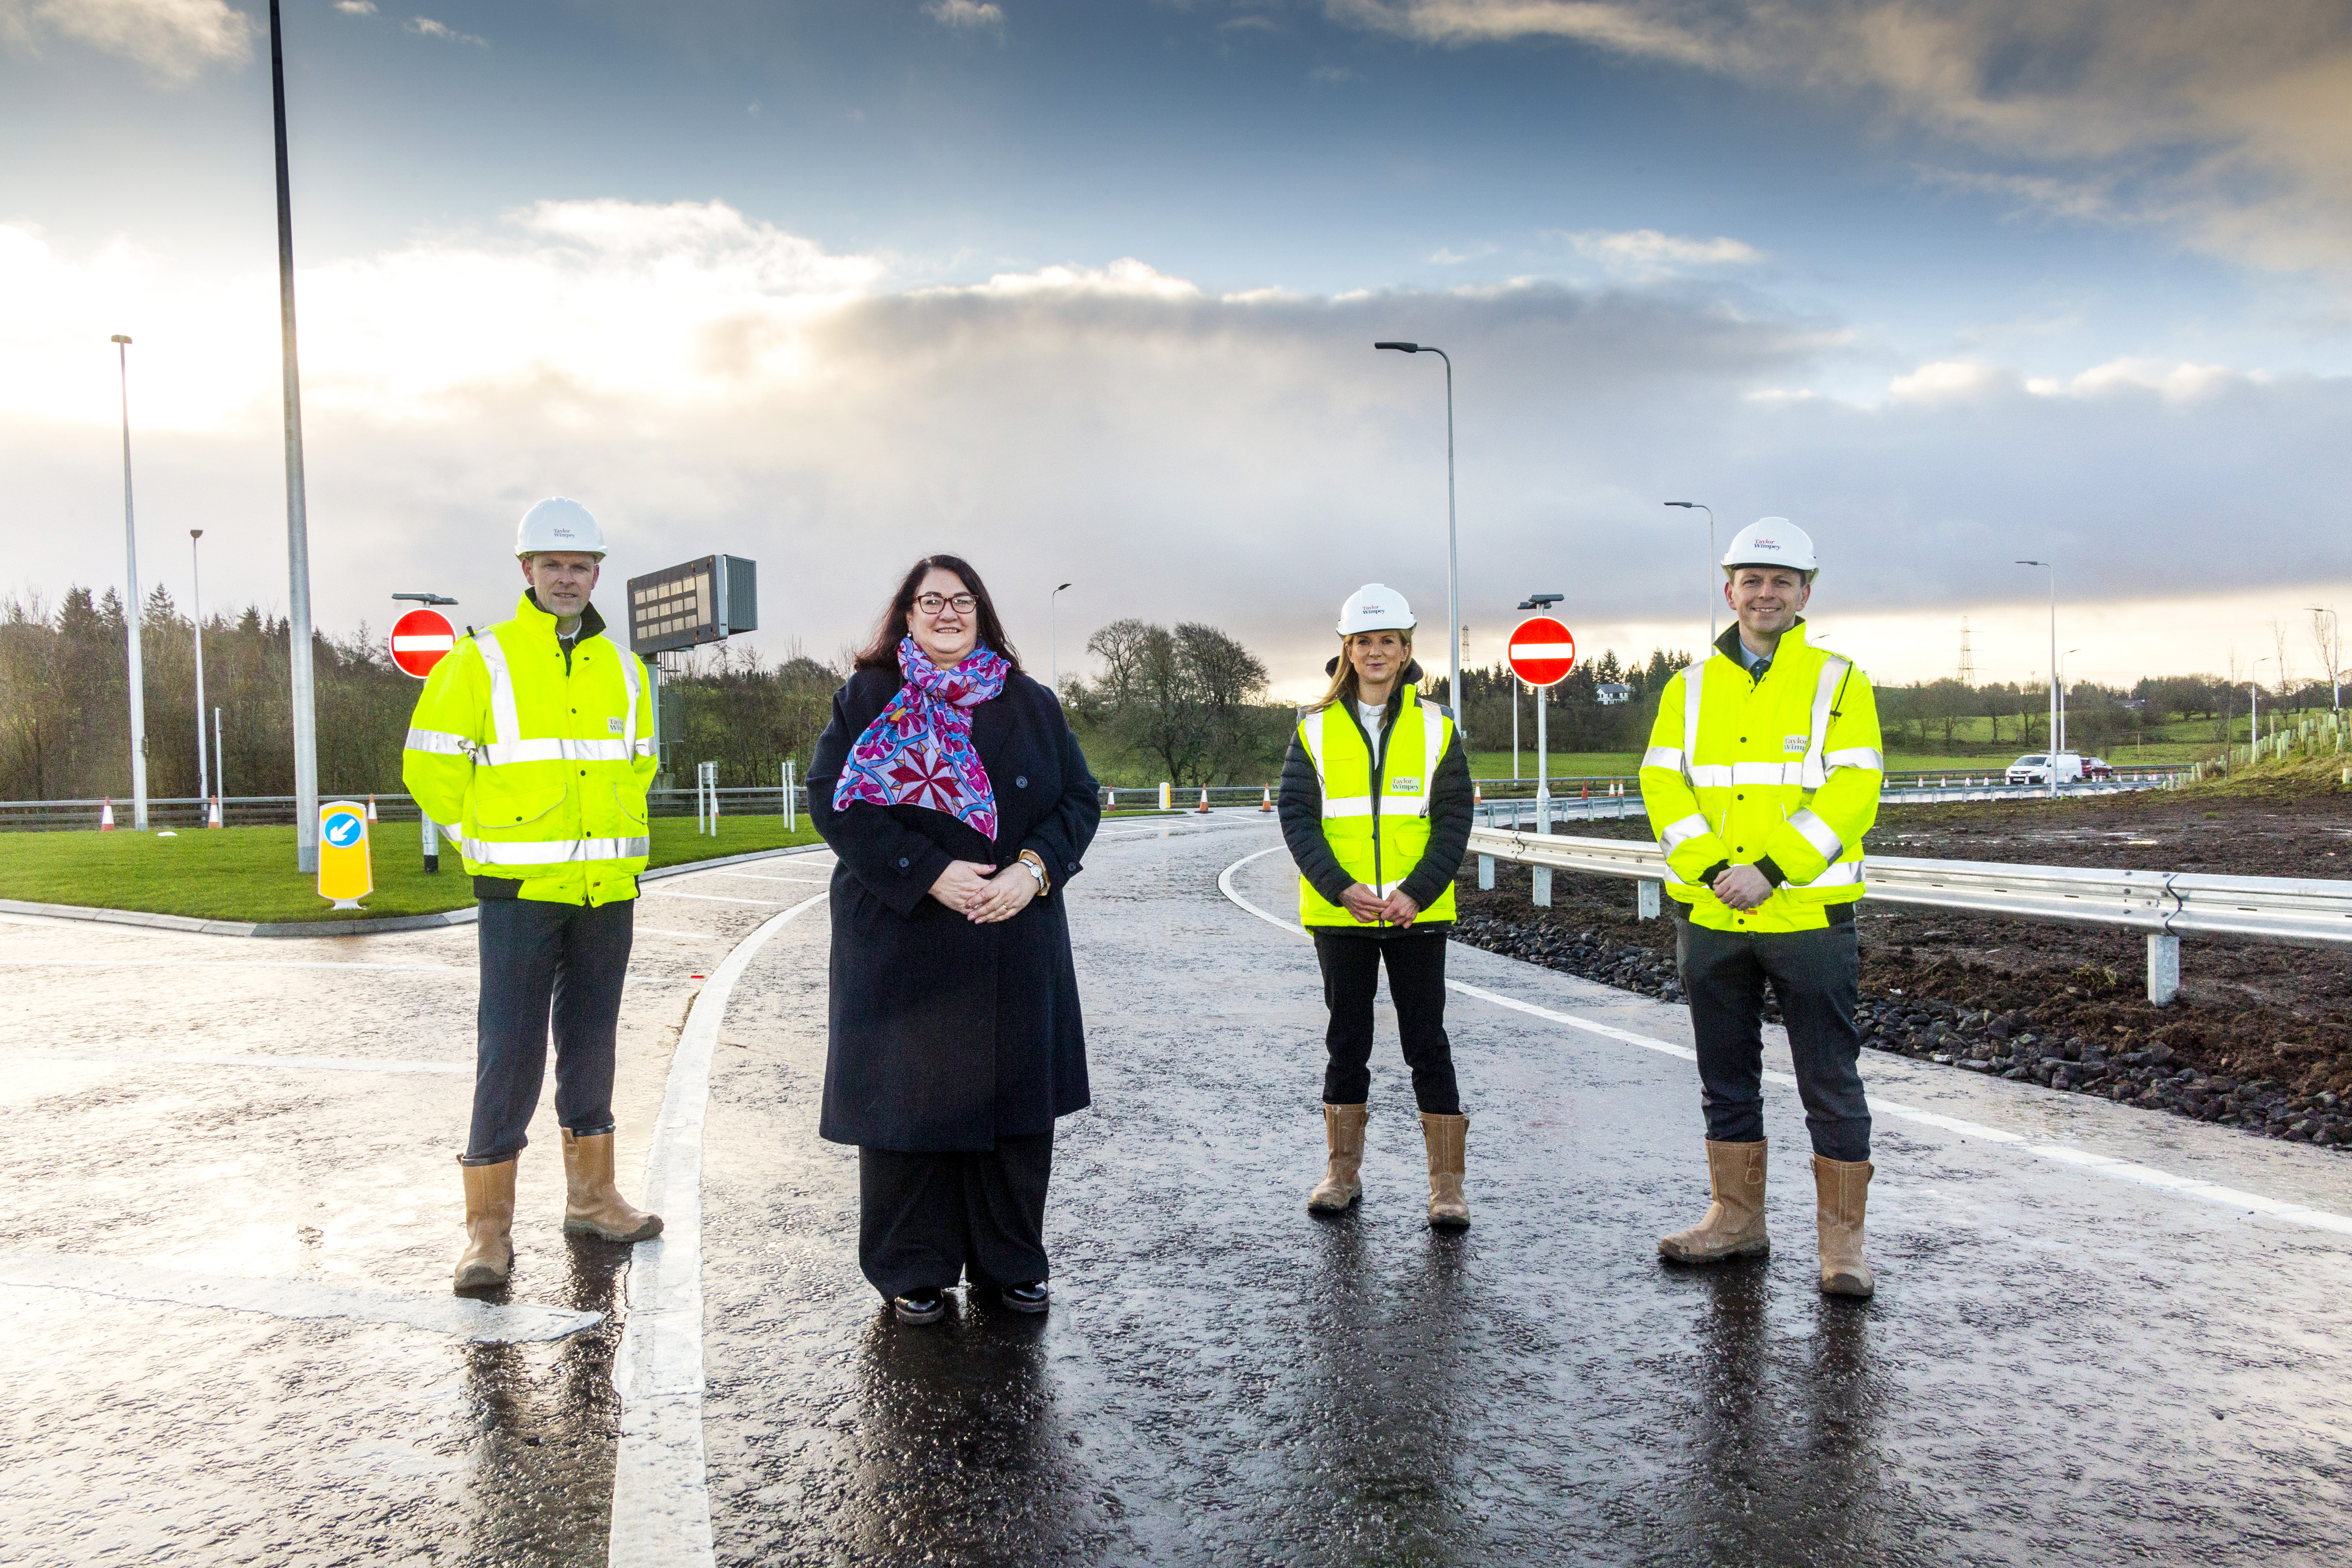 Taylor Wimpey opens 'much-anticipated' junction and access road into Maidenhill